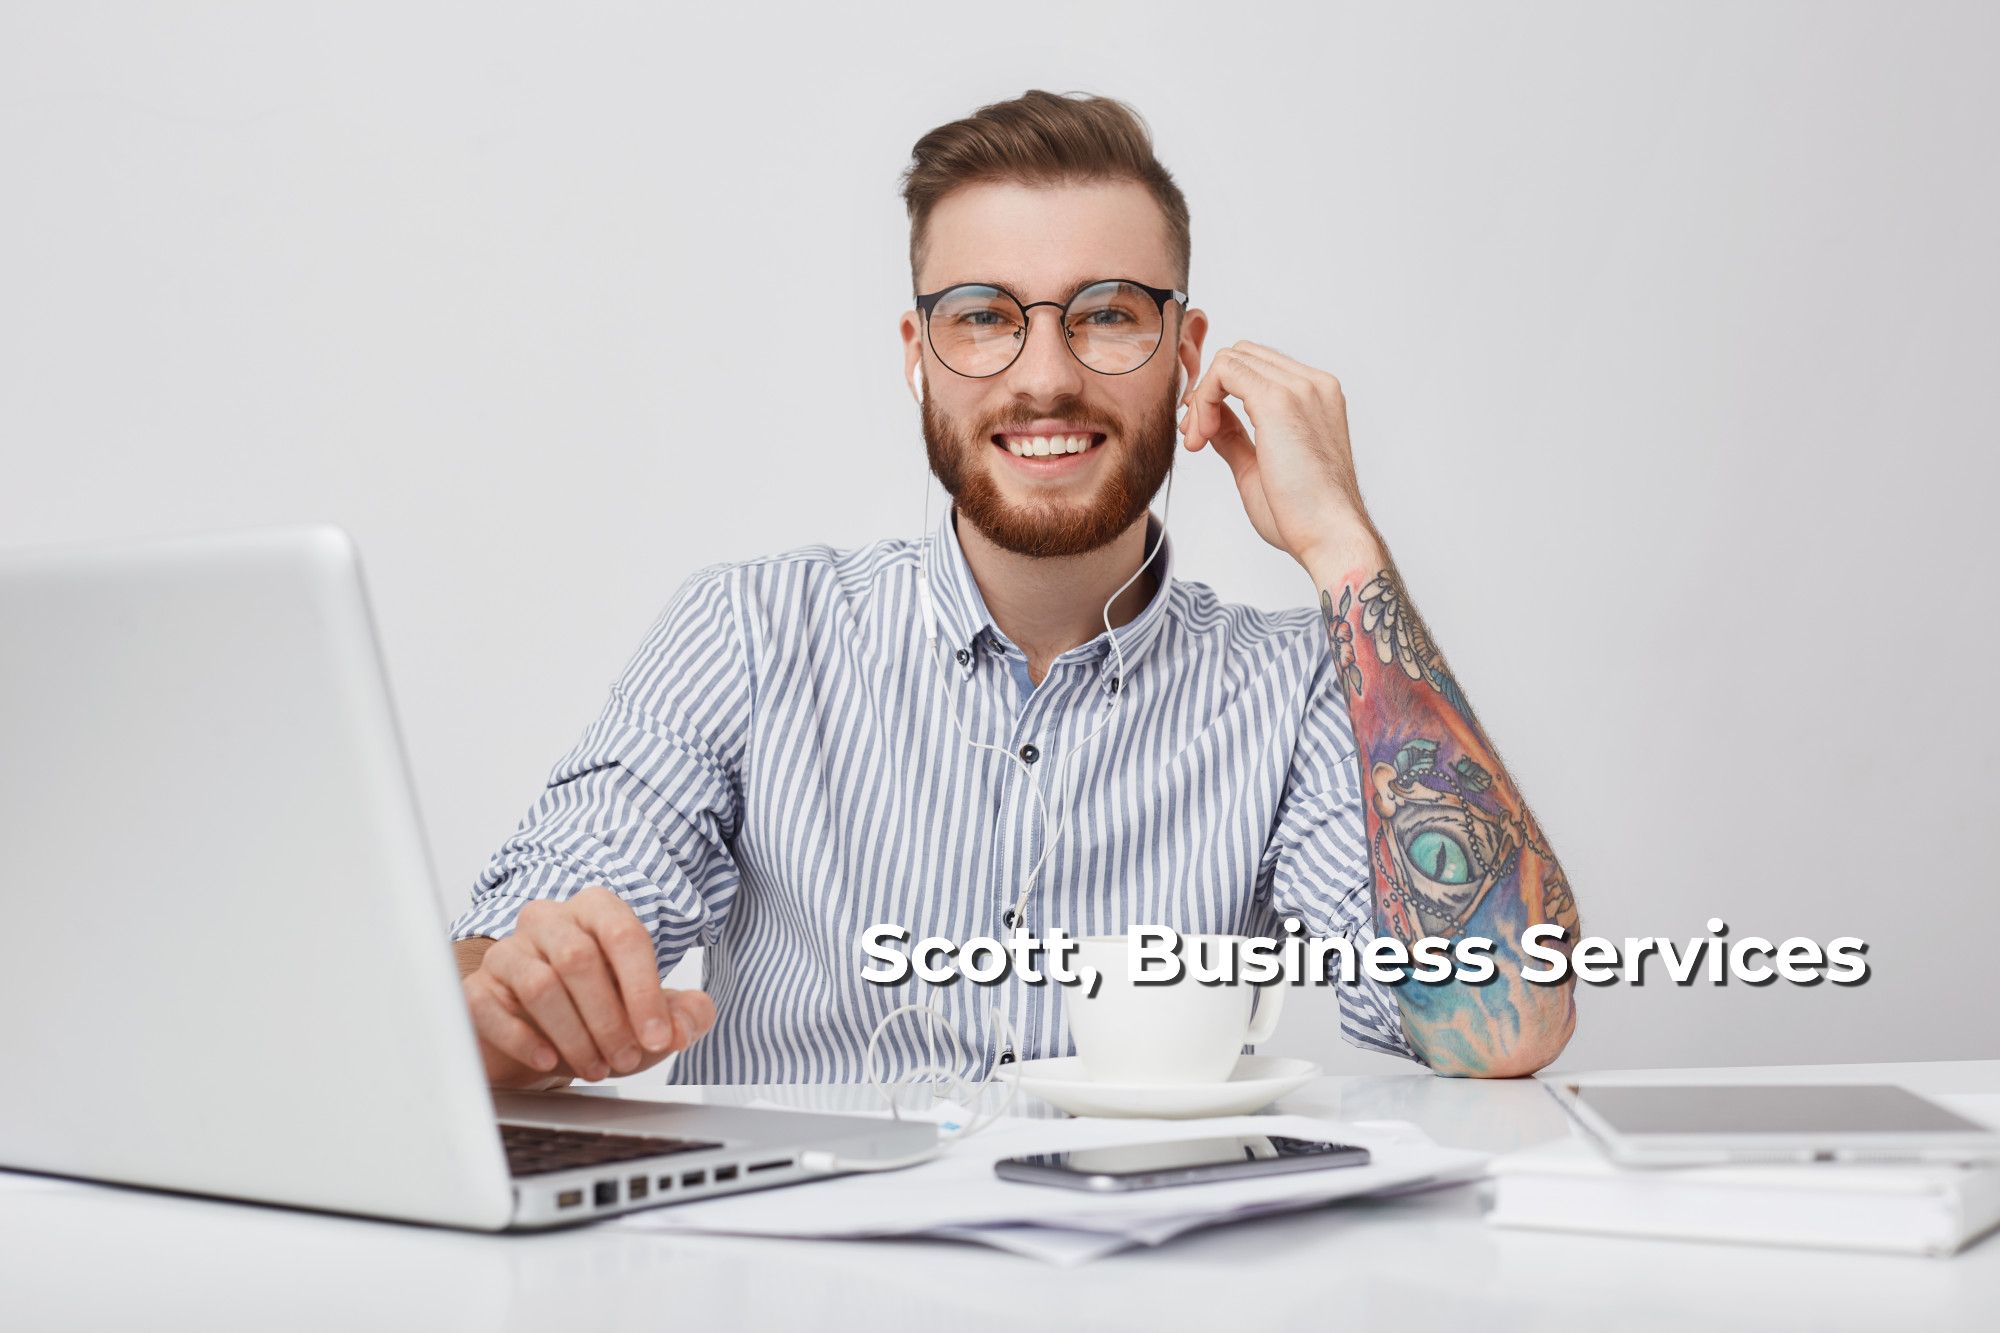 Business Services Freelance Services